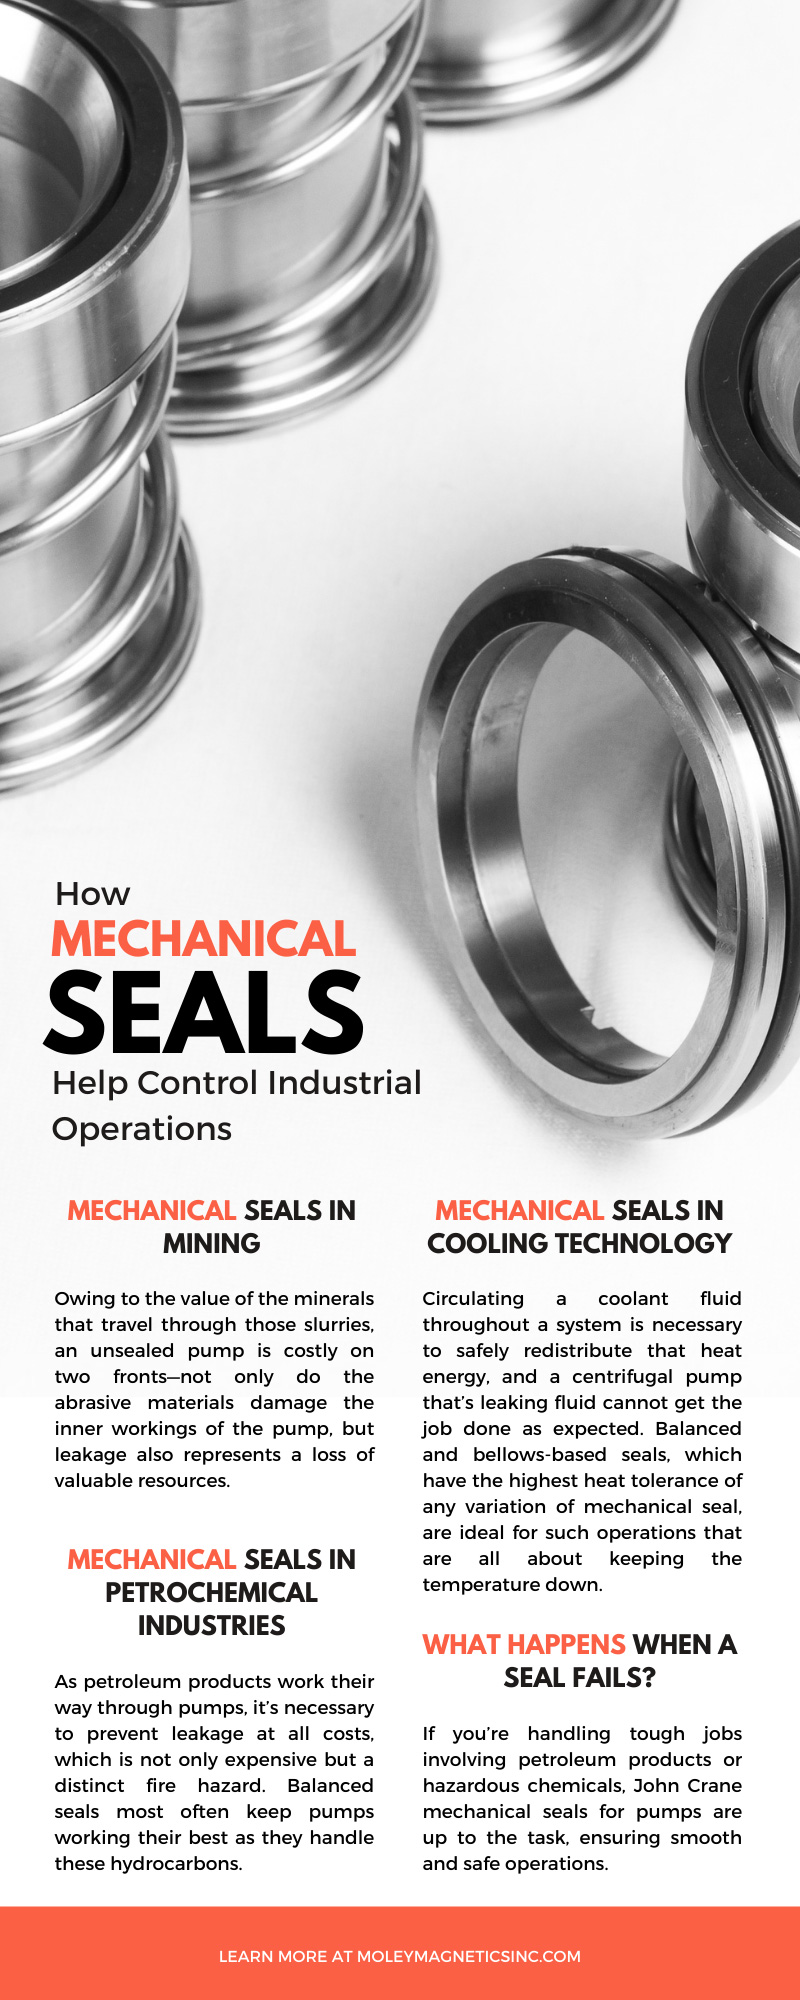 How Mechanical Seals Help Control Industrial Operations